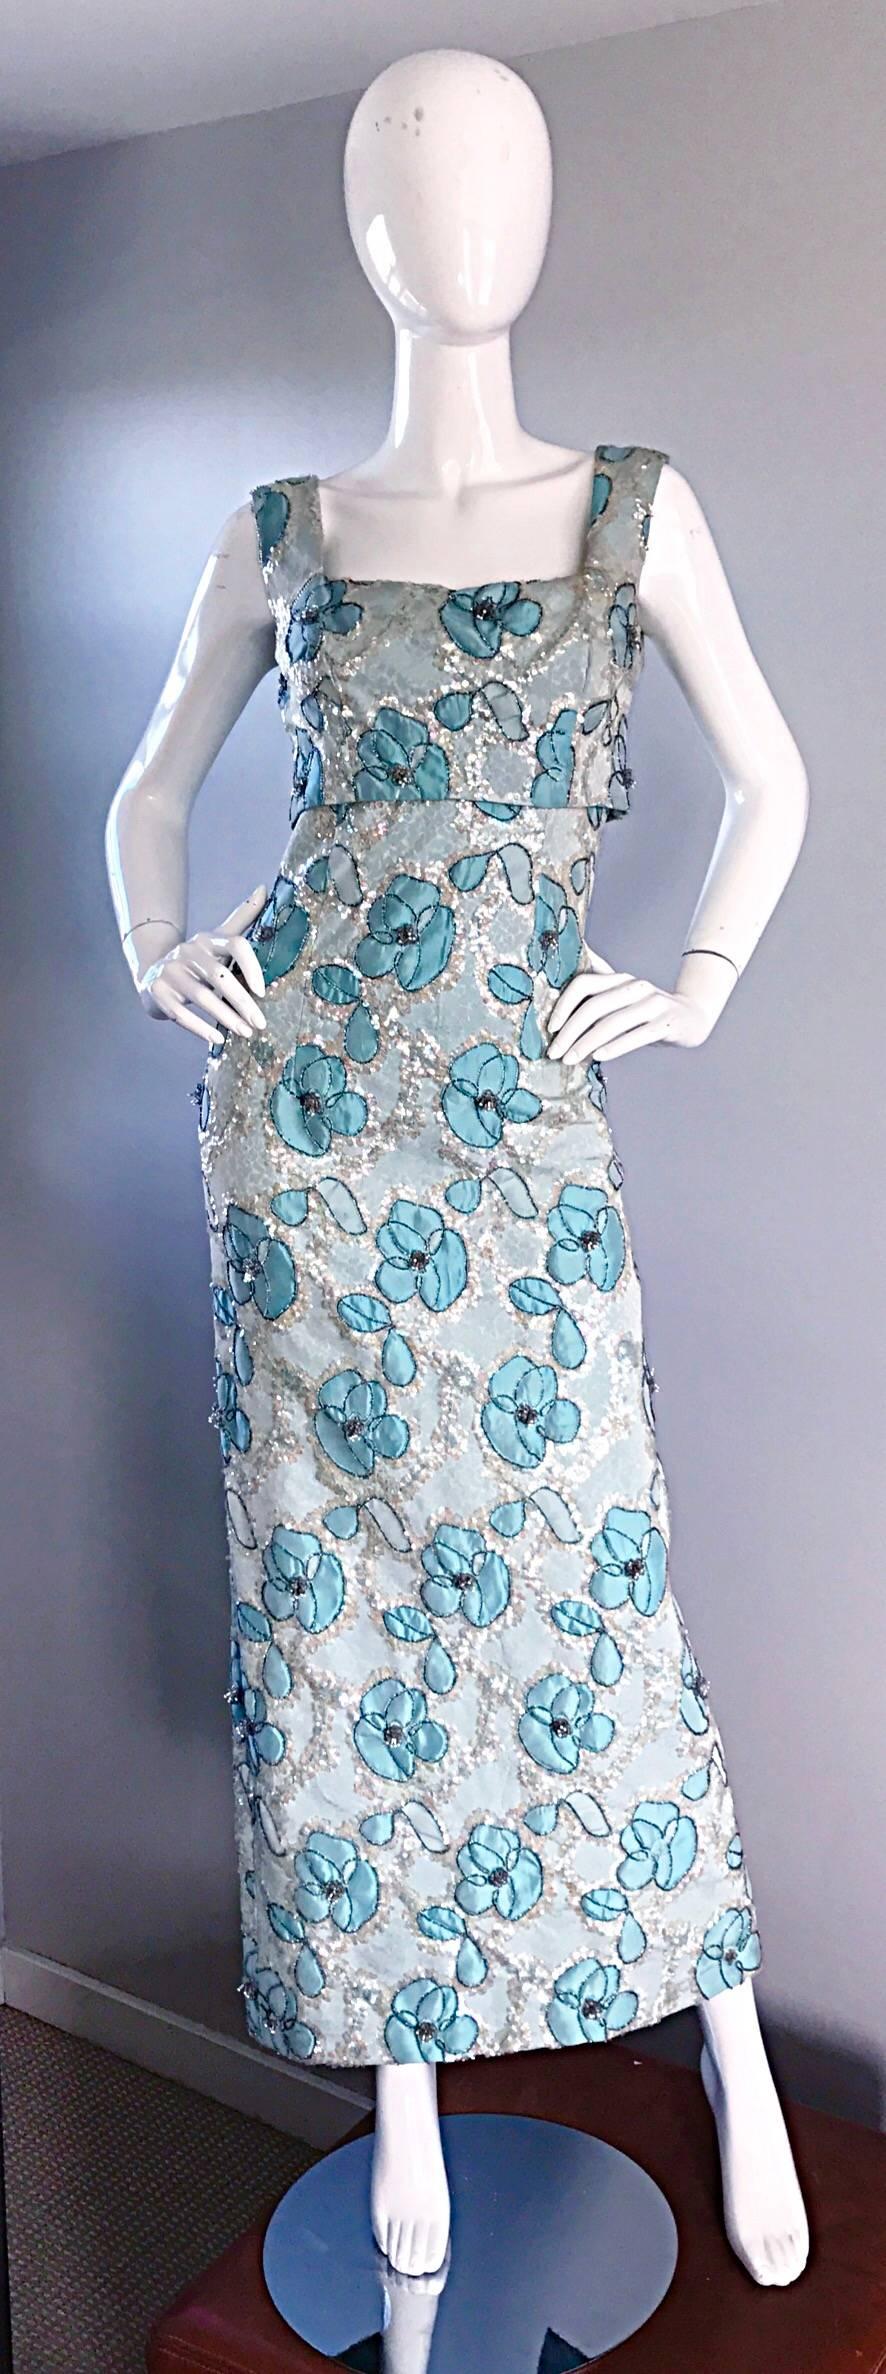 Outstanding late 1950s / early 1960s 60s BAIN'S Demi couture turquoise blue metallic beaded sequin gown! Features thousands of hand-sewn iridescent sequins and beads throughout. Shelf bust, with an attached top. Flower pattern throughout. Full metal